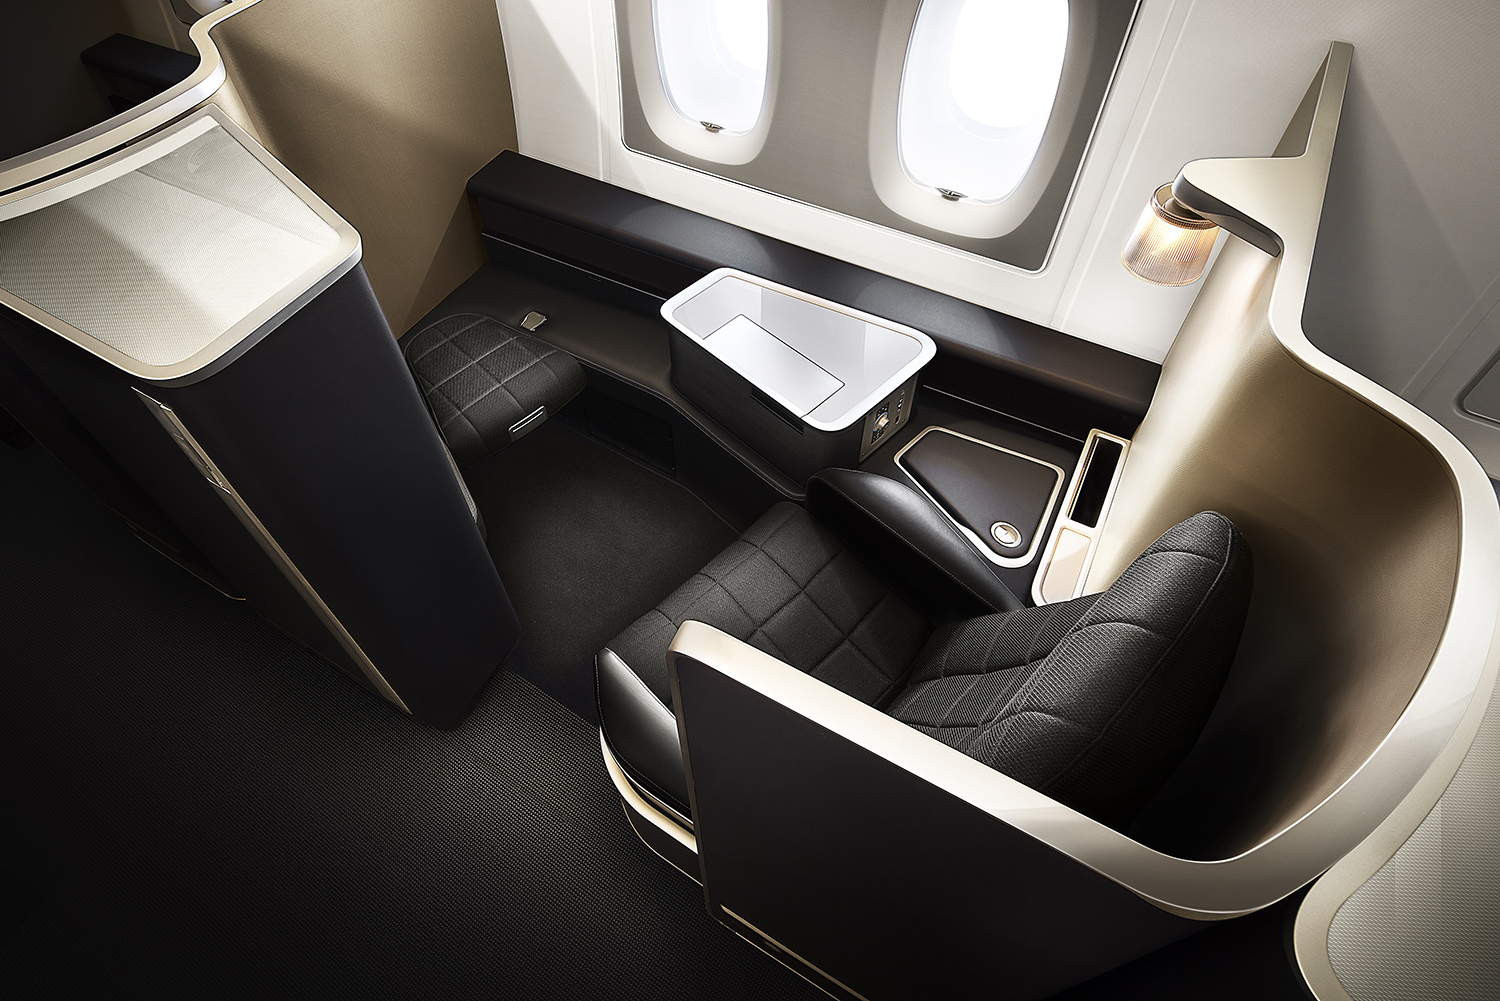 How to get a legitimate upgrade to first class